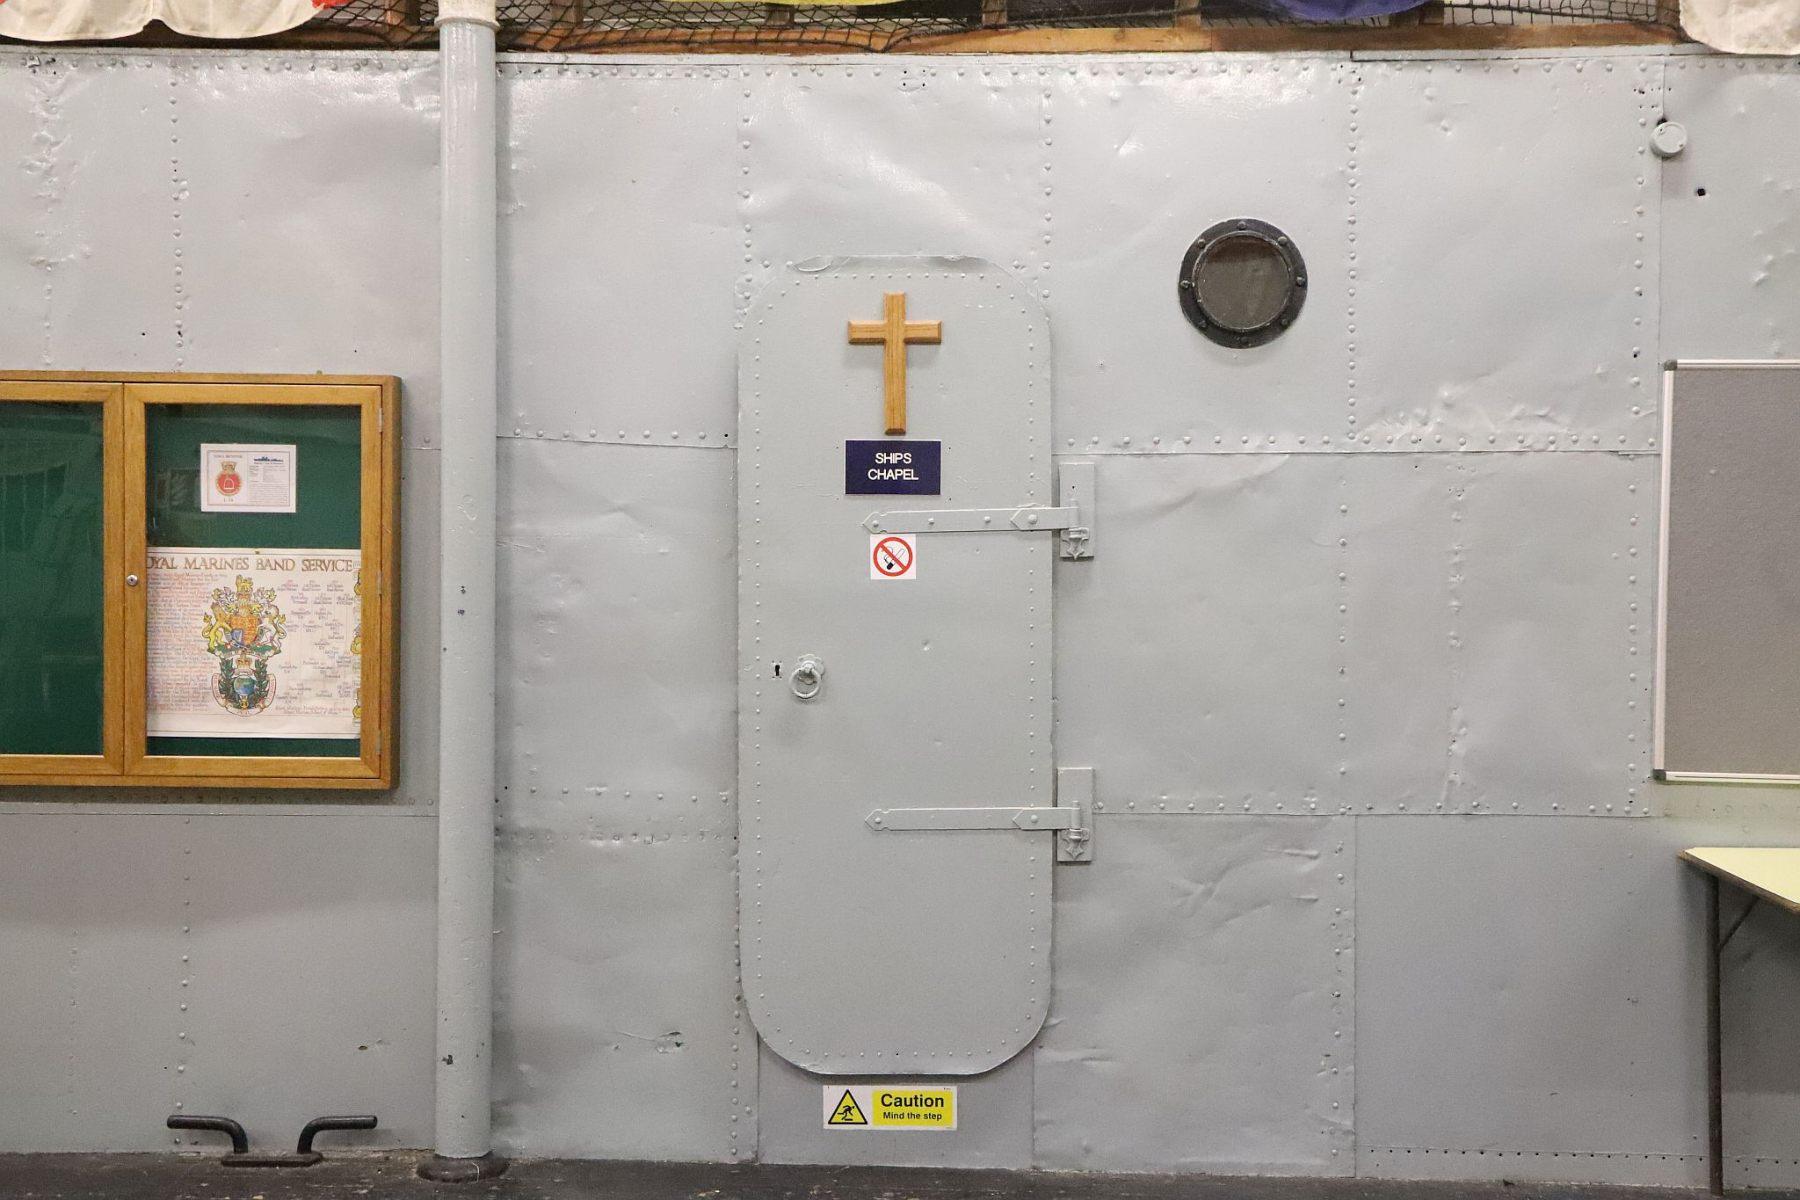 Watertight door to Ship's Chapel. Interior of the Kilburn Tin Tabernacle church (Cambridge Avenue, London) fitted out as a Royal Navy Ton Class ship by Sea Cadets of TS Bicester